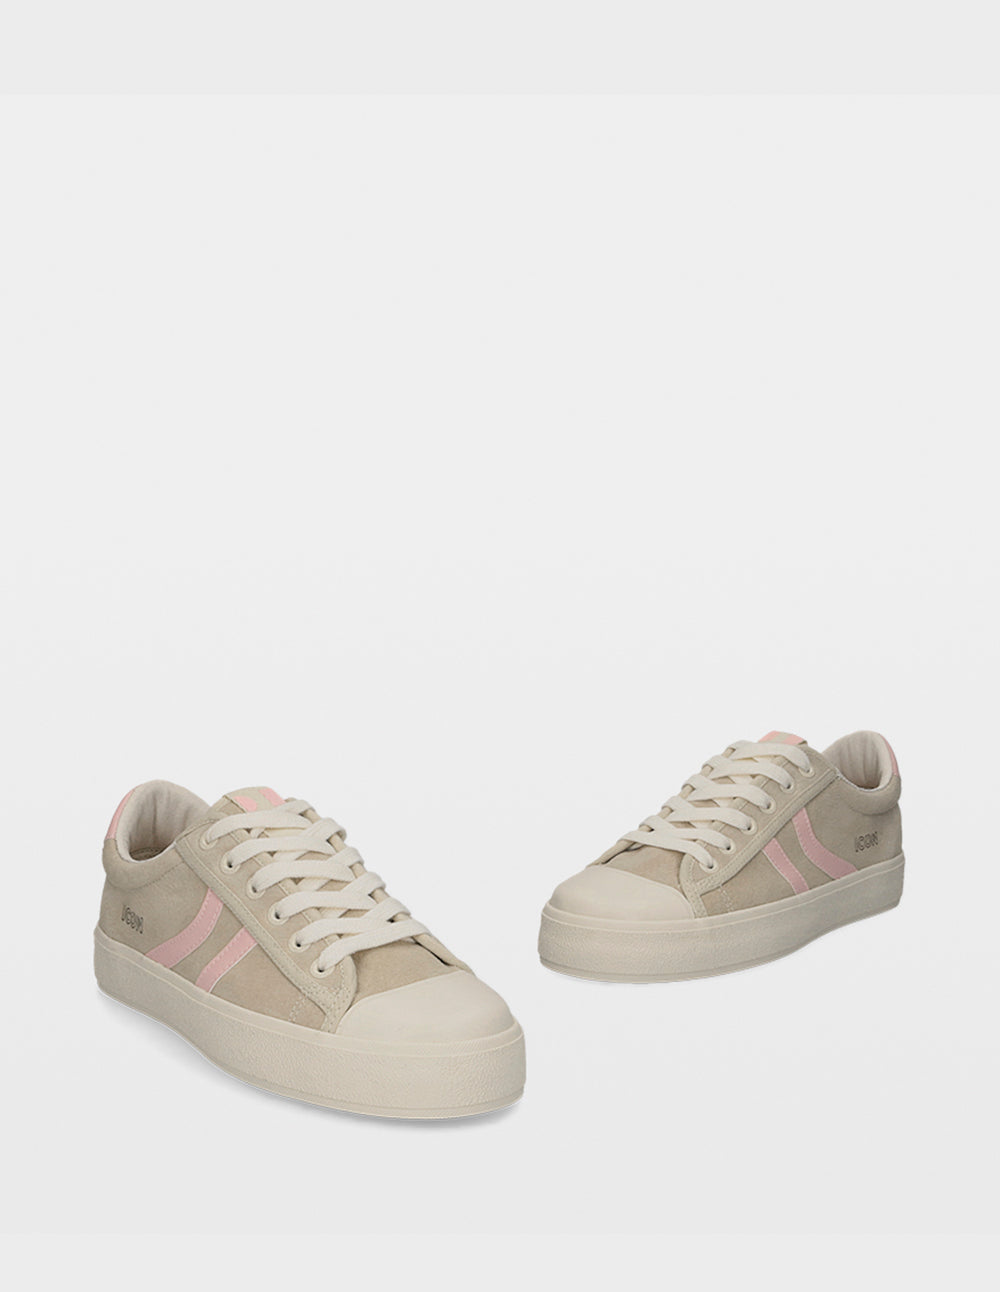 ICON-ONE BEIGE/PINK LEATHER WOMEN